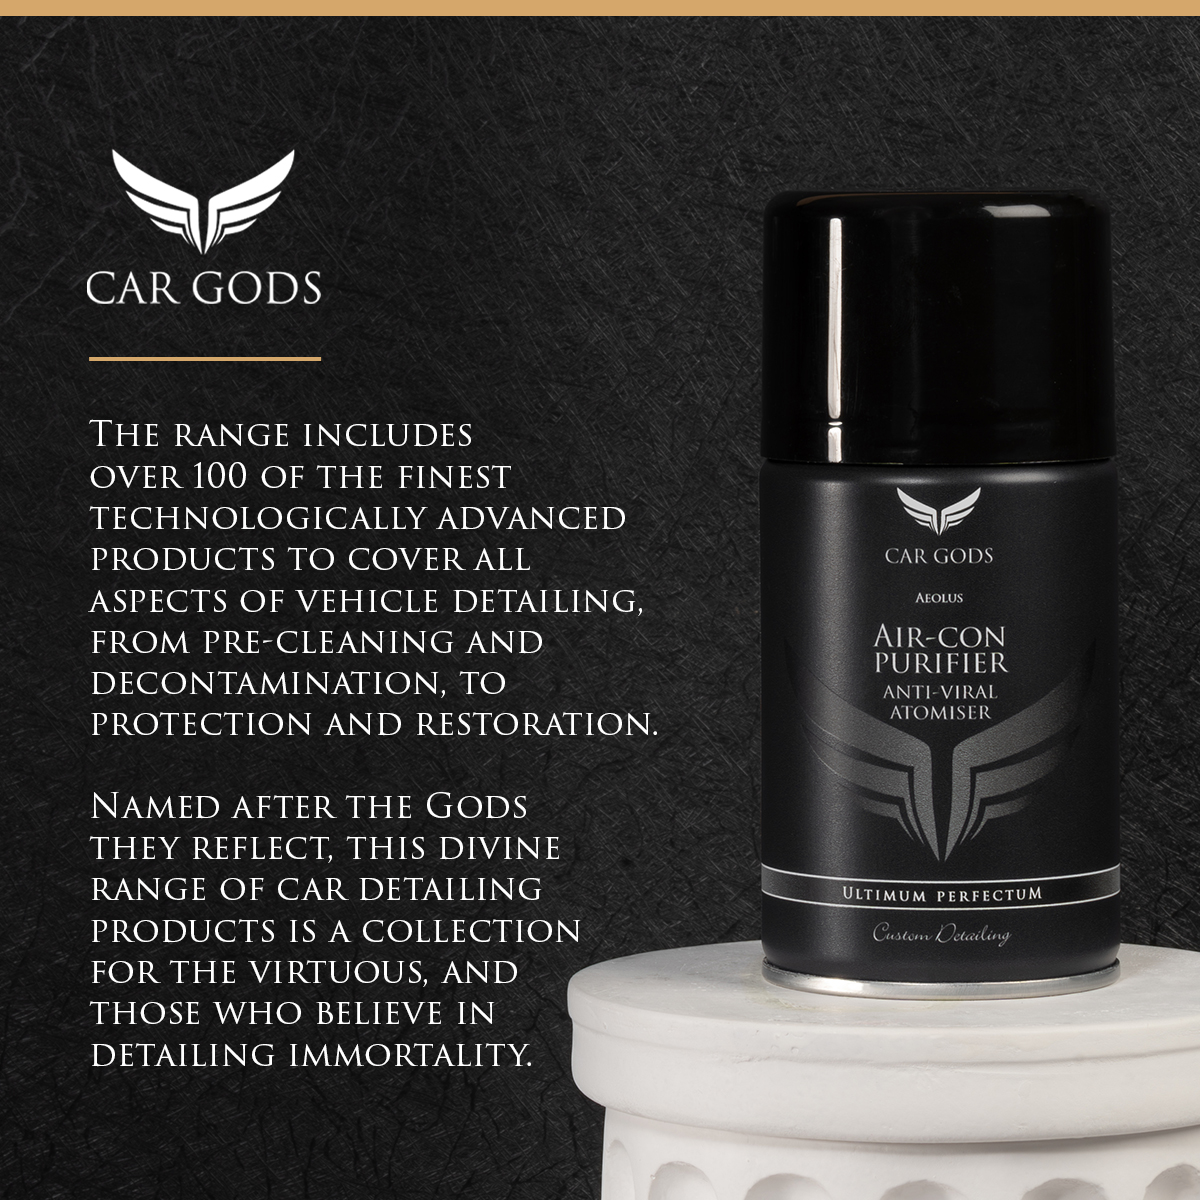 The Car Gods range includes over 100 of the finest technologically advanced products to cover all aspects of vehicle detailing, from pre-cleaning and decontamination to protection and restoration. Named after the Gods they reflect, this divine range of car detailing products is a collection for the virtuous, and those who believe in detailing immortality.